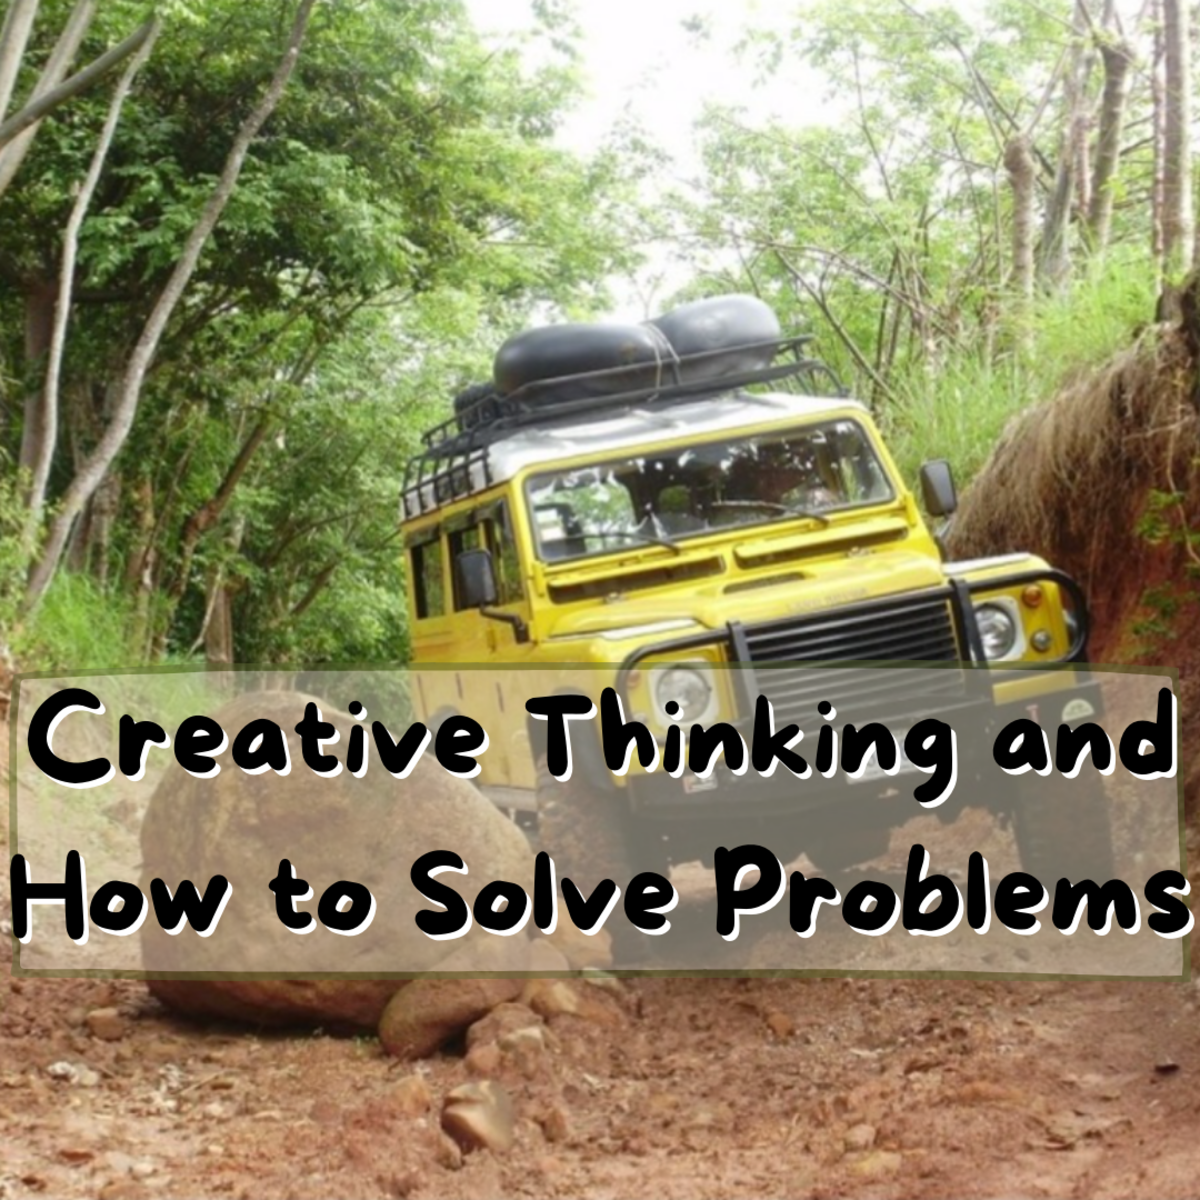 Learn how creative thinking can help you solve real-life problems. Sometimes we need to think outside the box to overcome the obstacles we face.